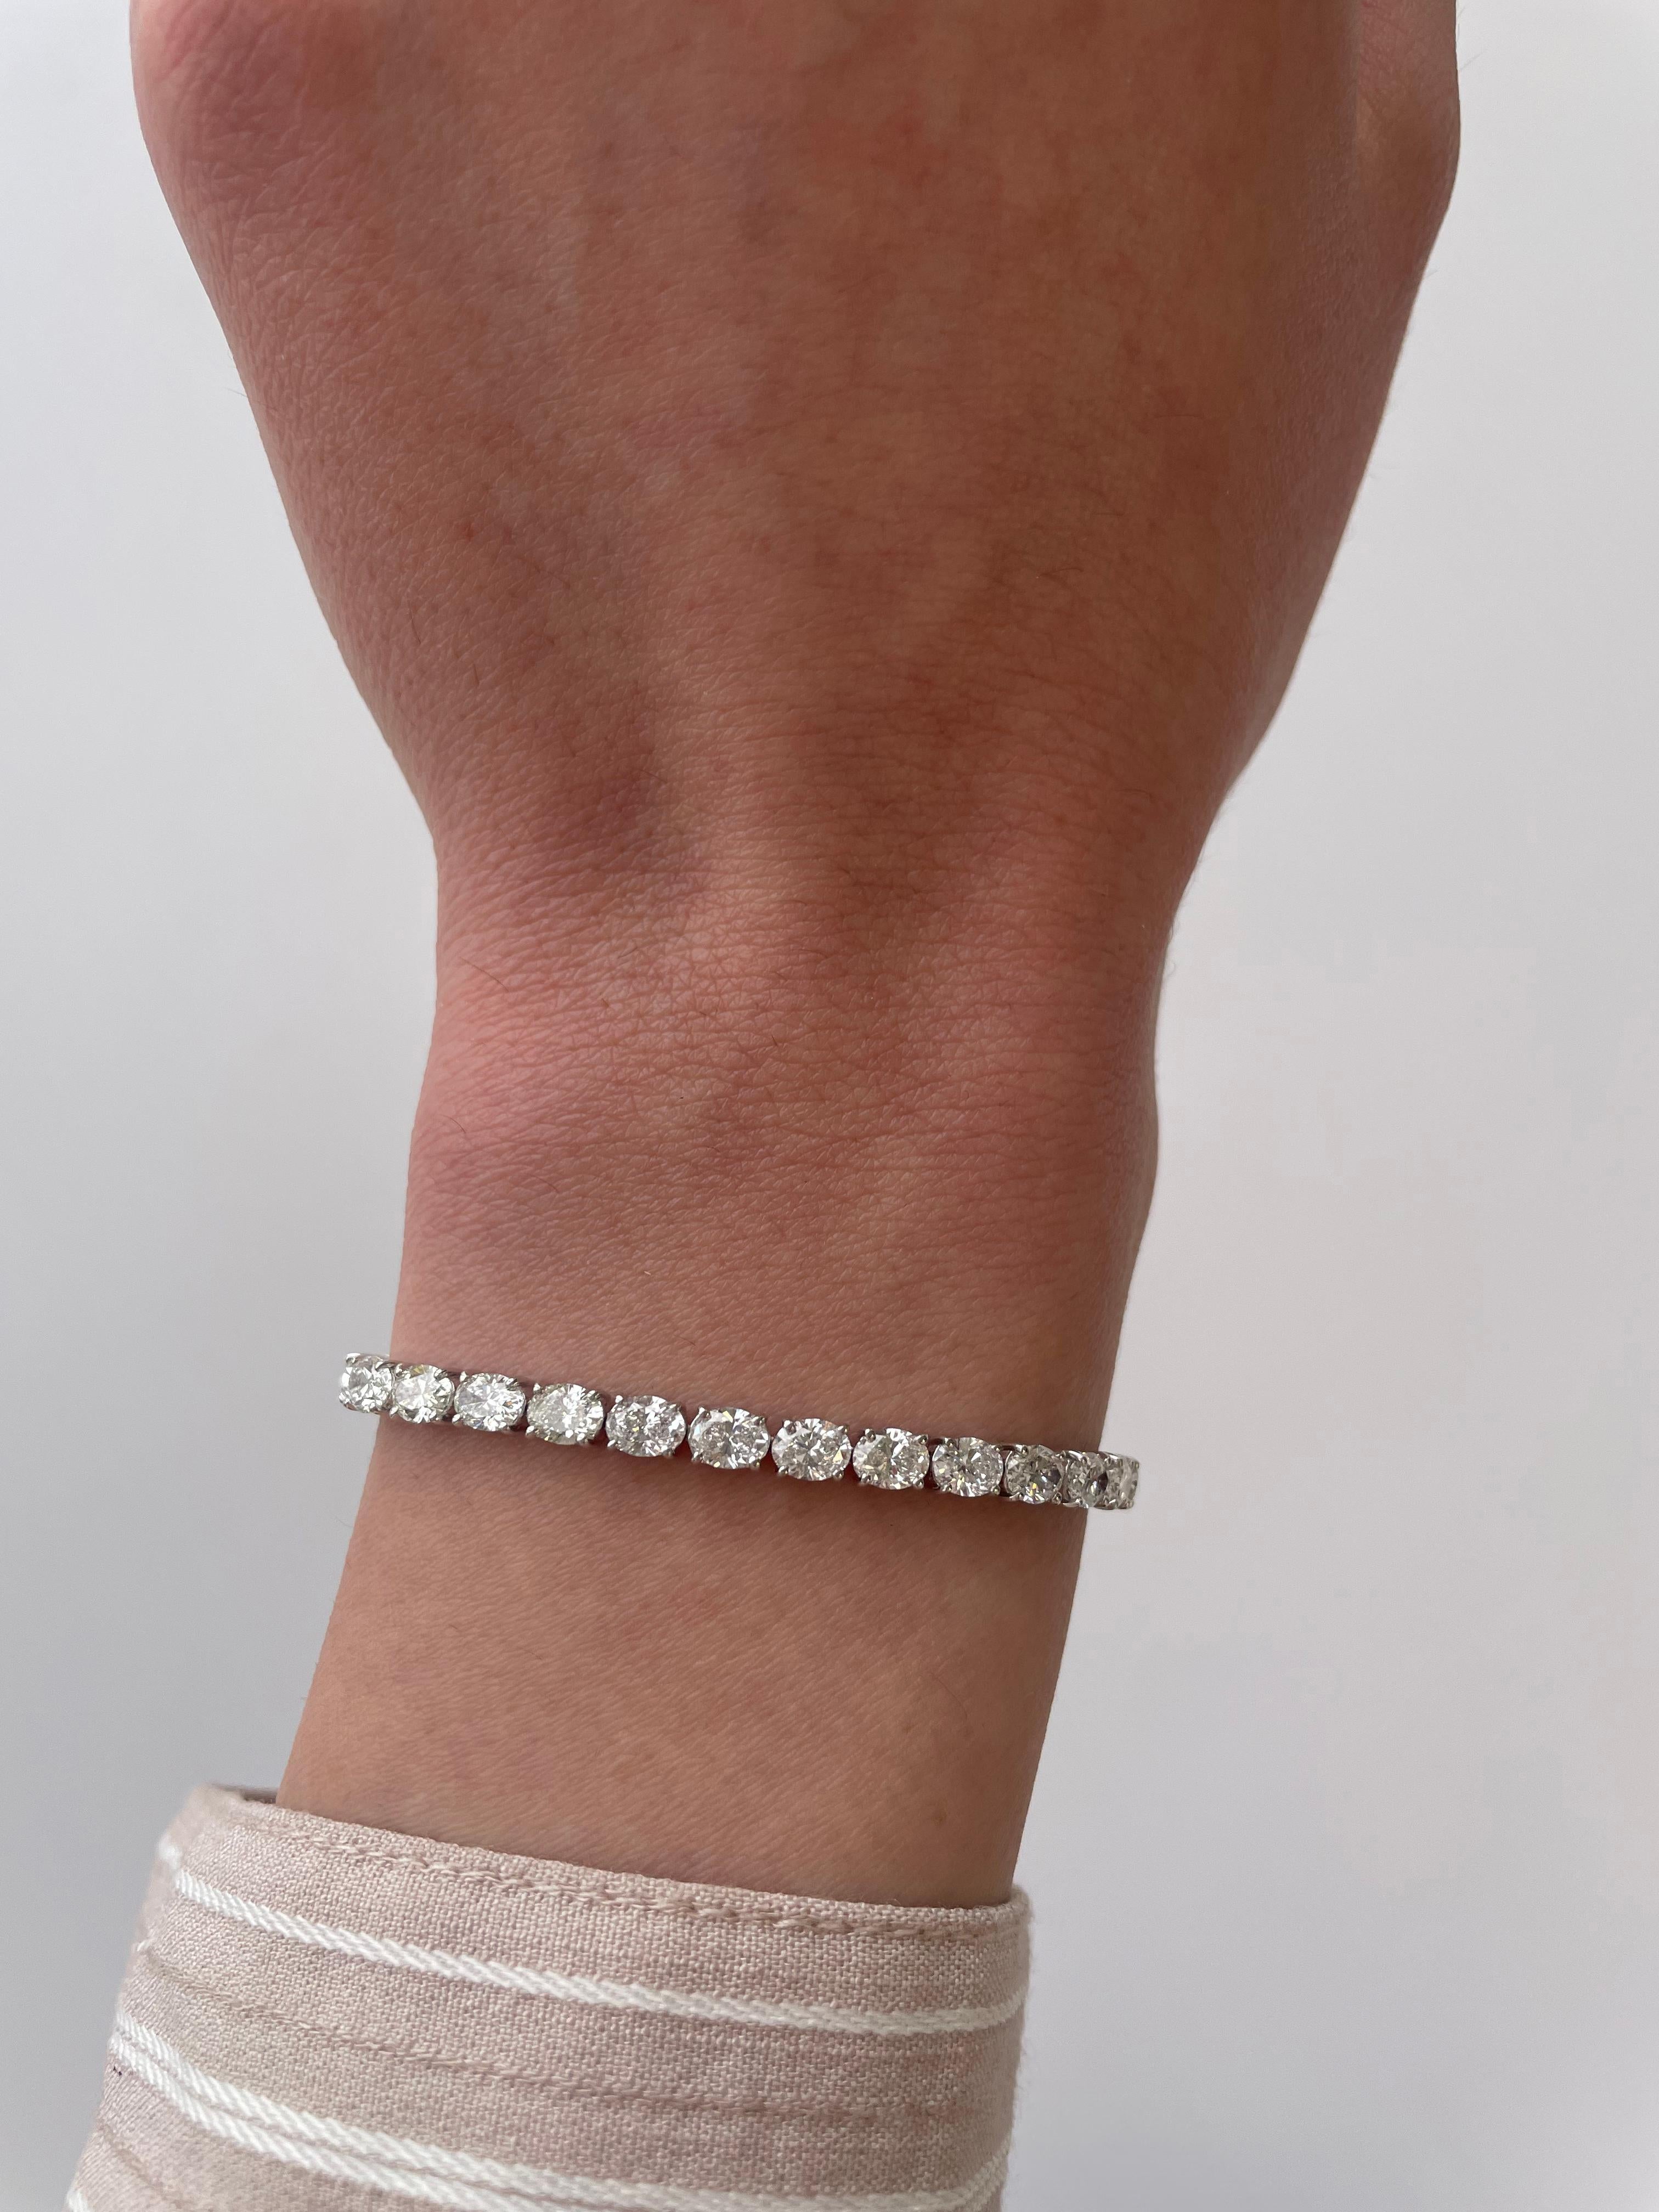 Stunning modern east-west cut diamond tennis bracelet. High jewelry by Alexander Beverly Hills.
36 oval cut diamonds, 8.82 carats. Approximately F/G color and VS2/SI1 clarity. 18k white gold, 8.32 grams, 7 inches.
Accommodated with an up to date